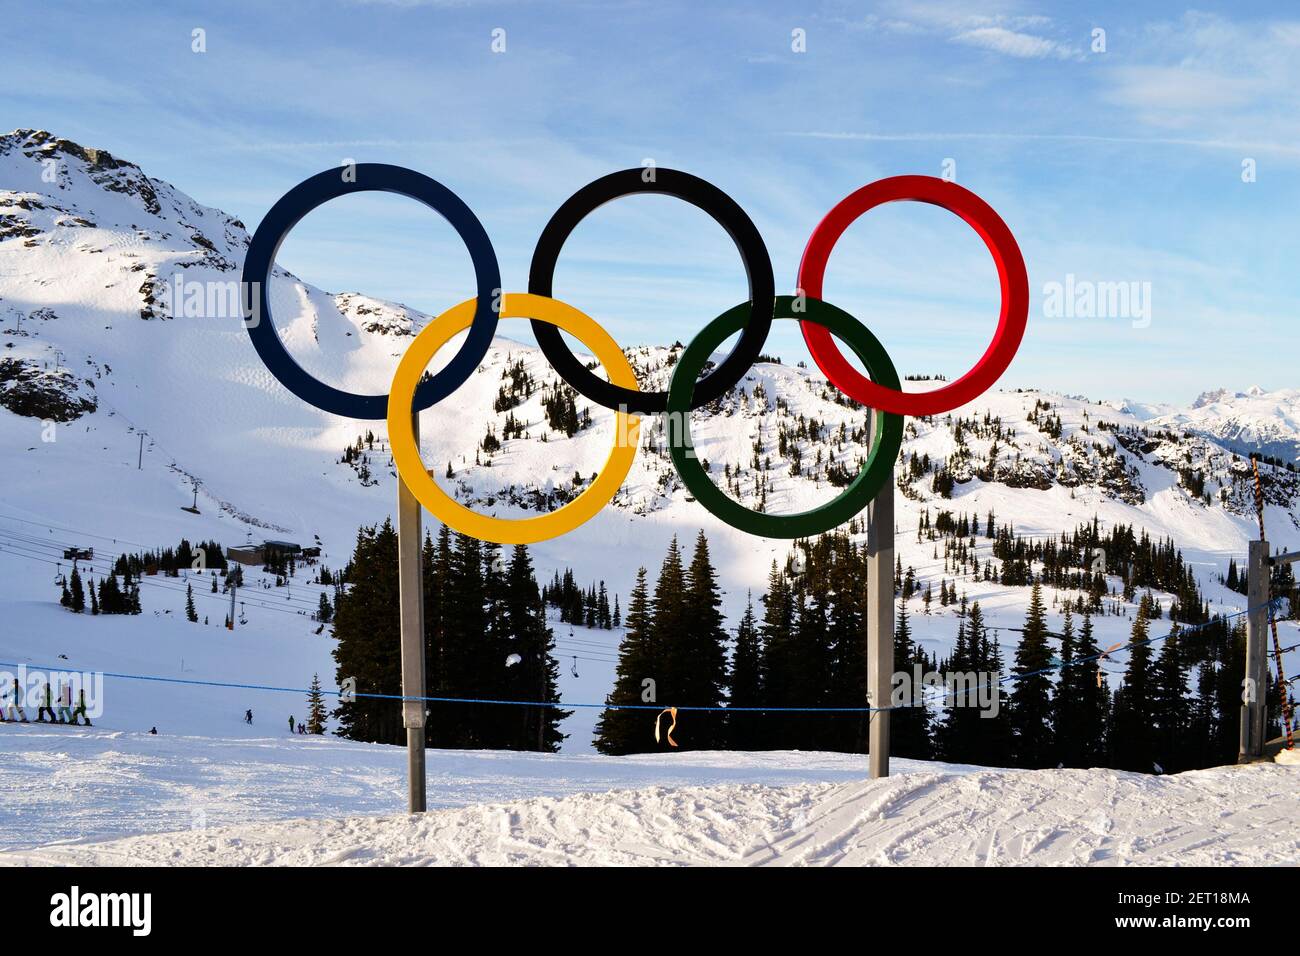 Whistler, British Columbia, Canada 2013. The Olympic symbol against the rocky mountains Stock Photo